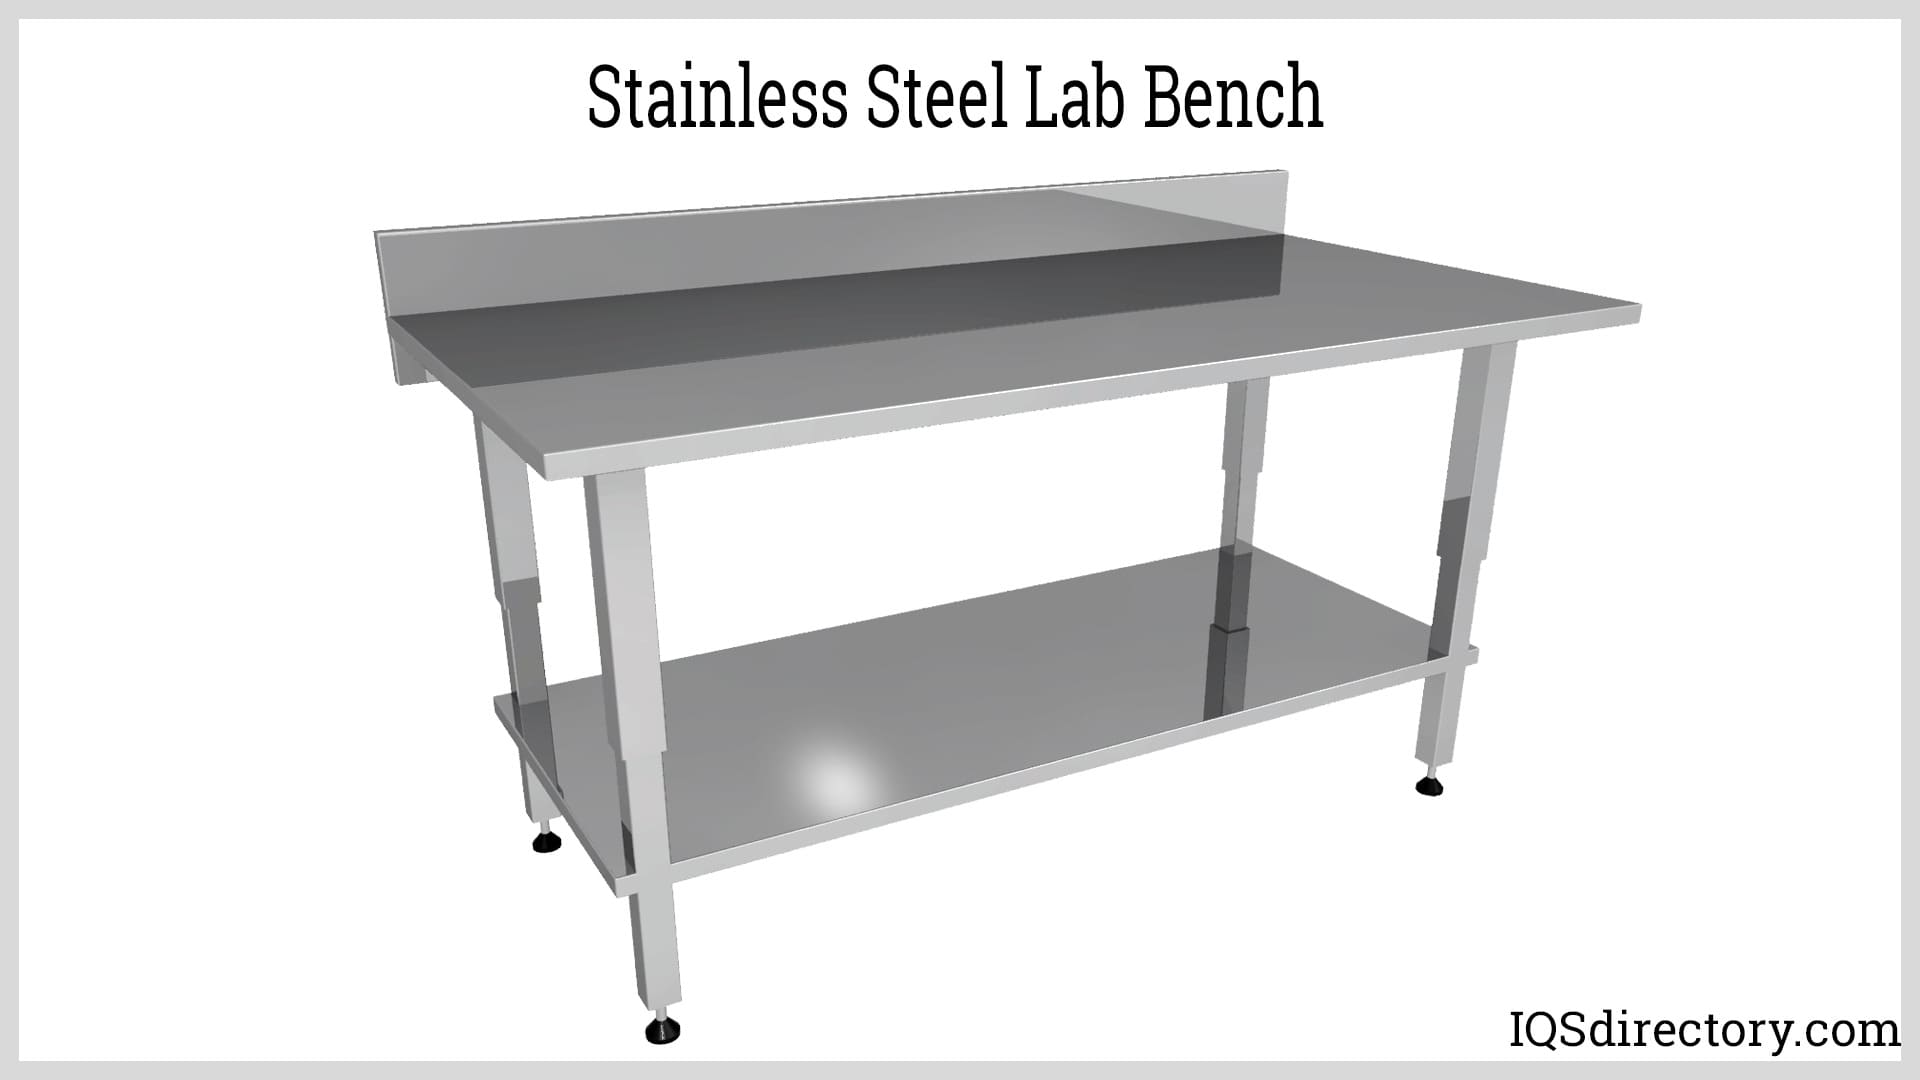 Stainless Steel Lab Bench